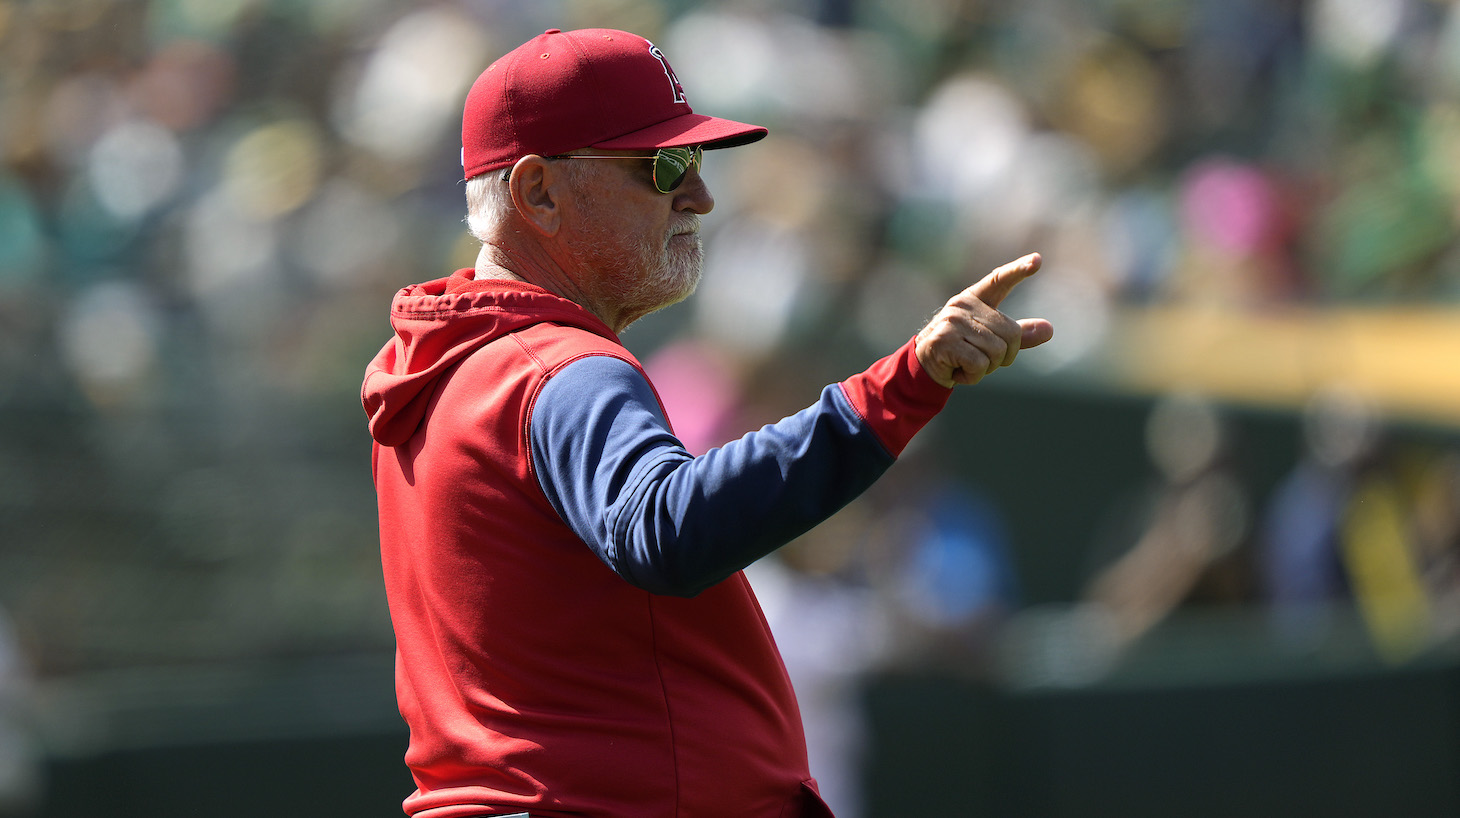 OAKLAND, CALIFORNIA - MAY 15: Manager Joe Maddon #70 of the Los Angeles Angels signals the bullpen to make a pitching change against the Oakland Athletics in the bottom of the seventh inning at RingCentral Coliseum on May 15, 2022 in Oakland, California. (Photo by Thearon W. Henderson/Getty Images)